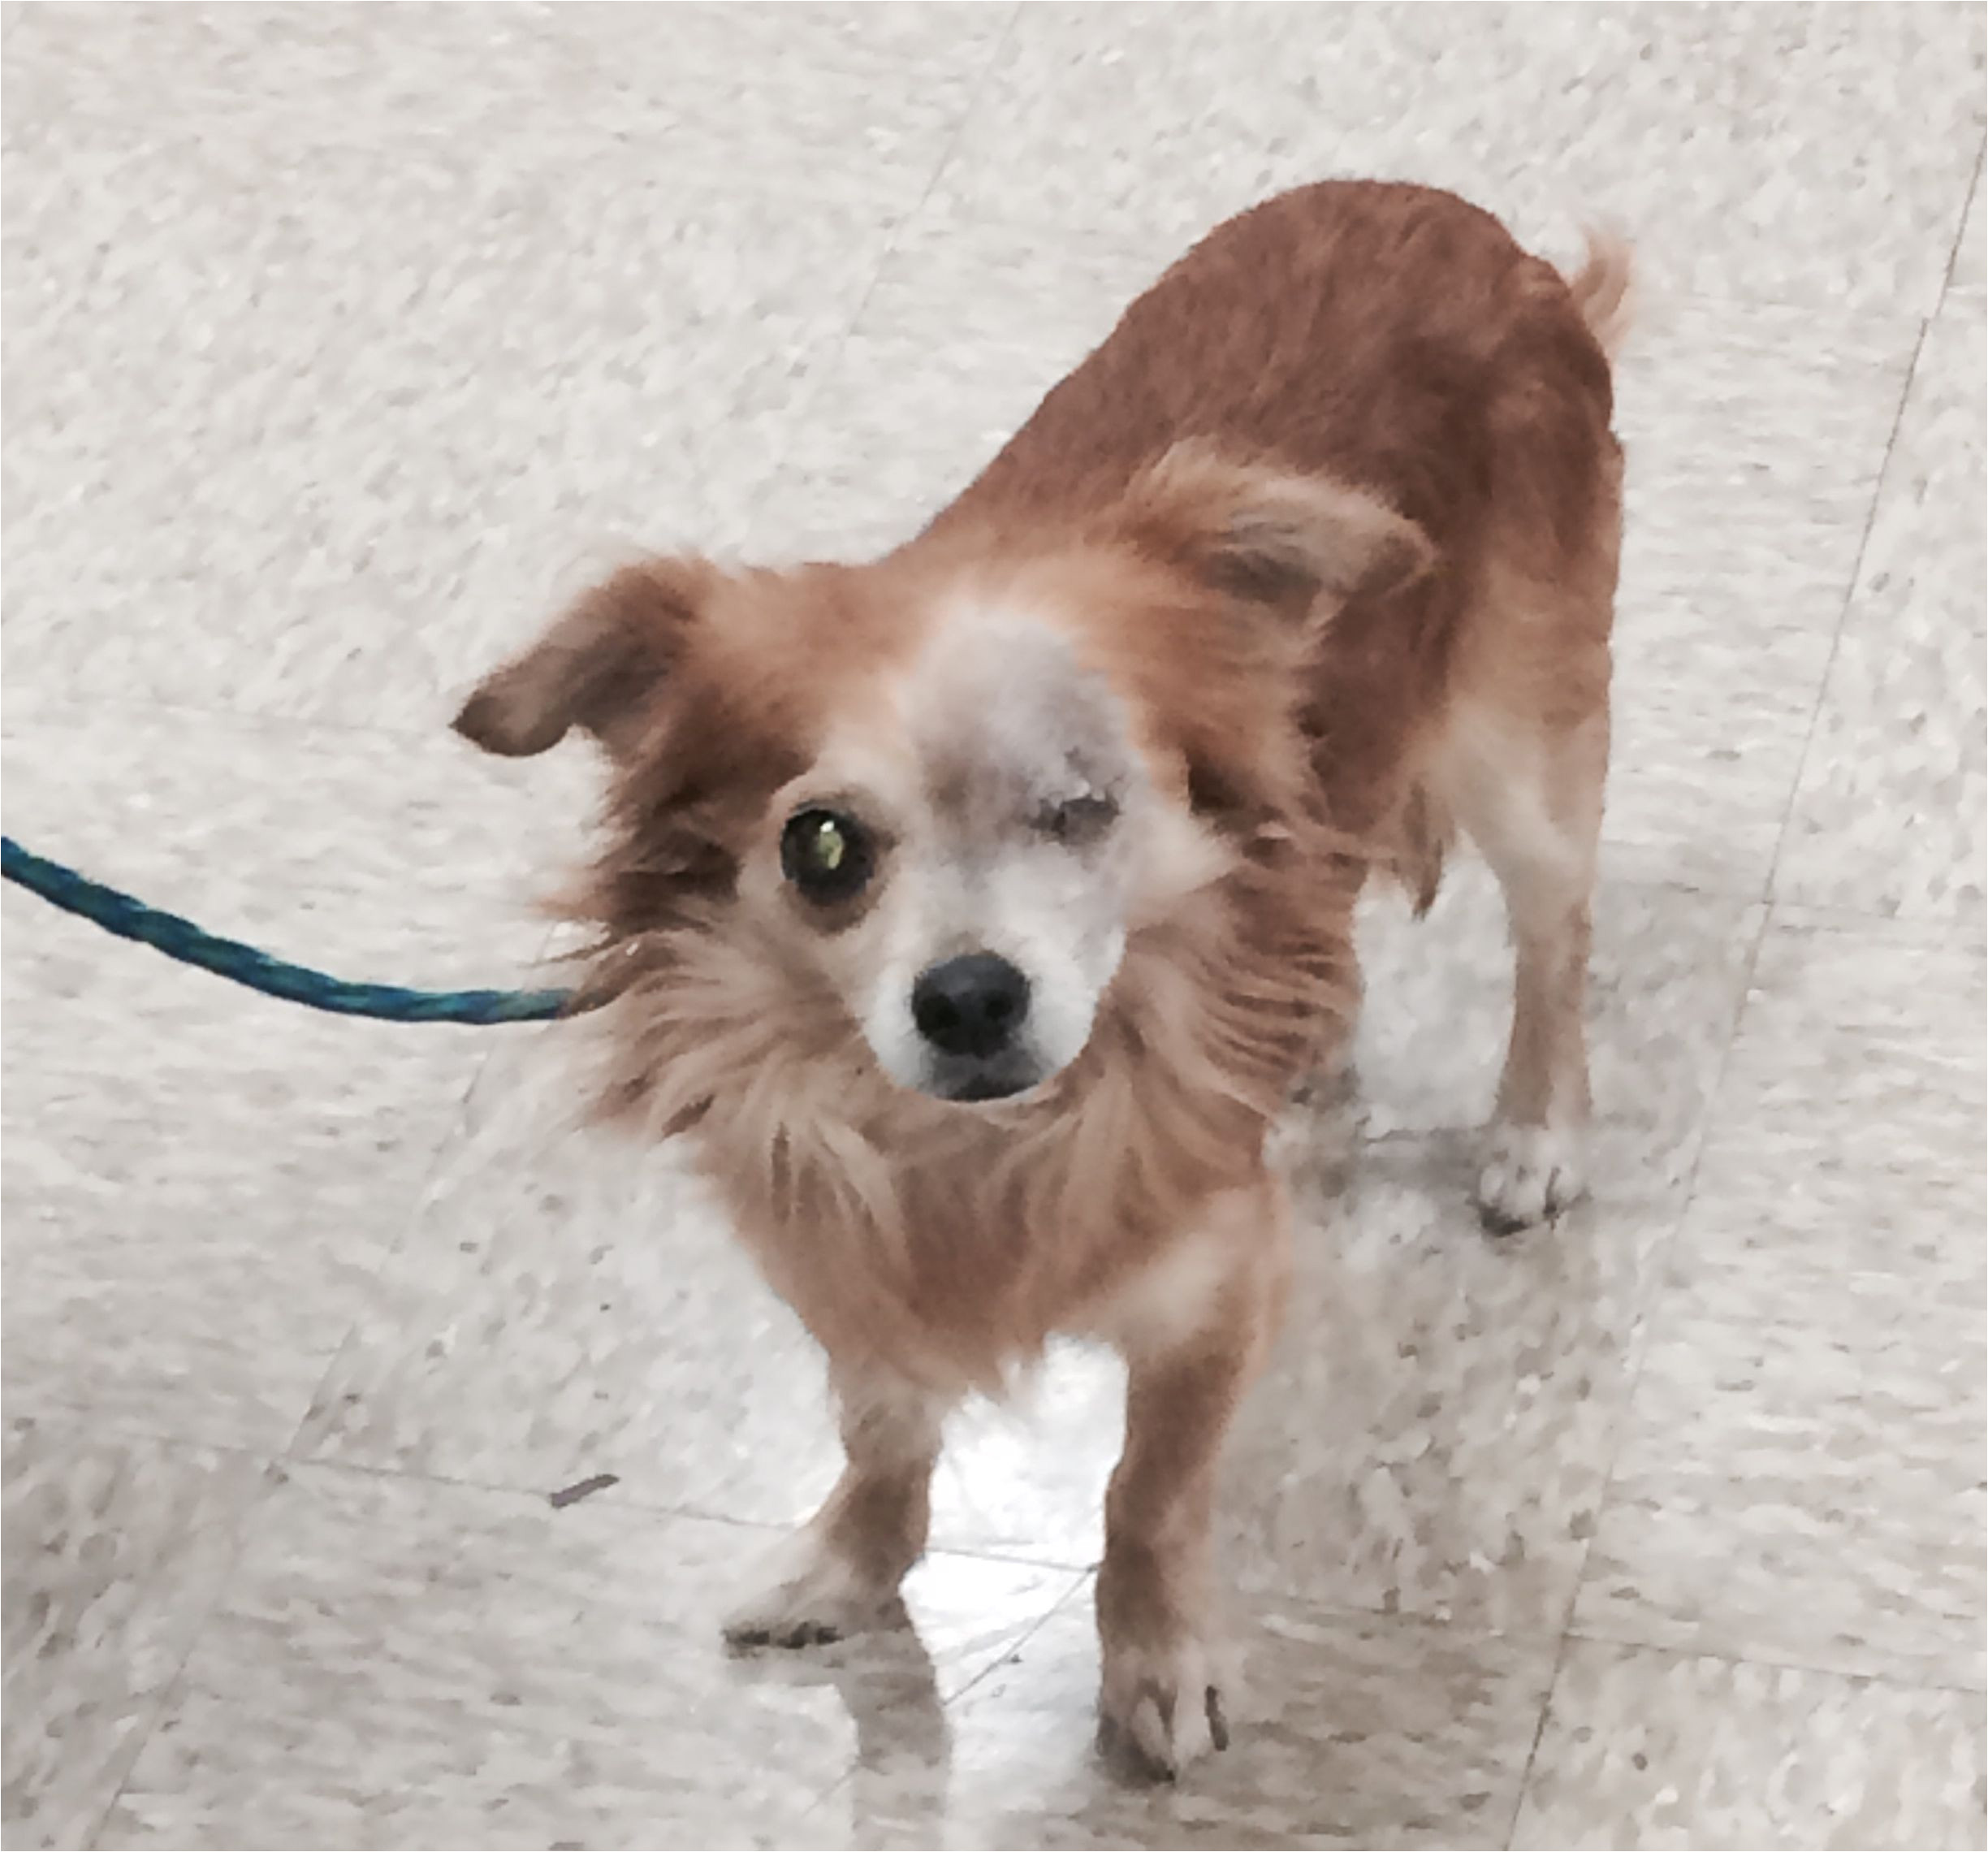 Pets without Partners Redding Ca Robert is A 5 to 6 Year Old 8 Pound Long Haired Chihuahua He is A